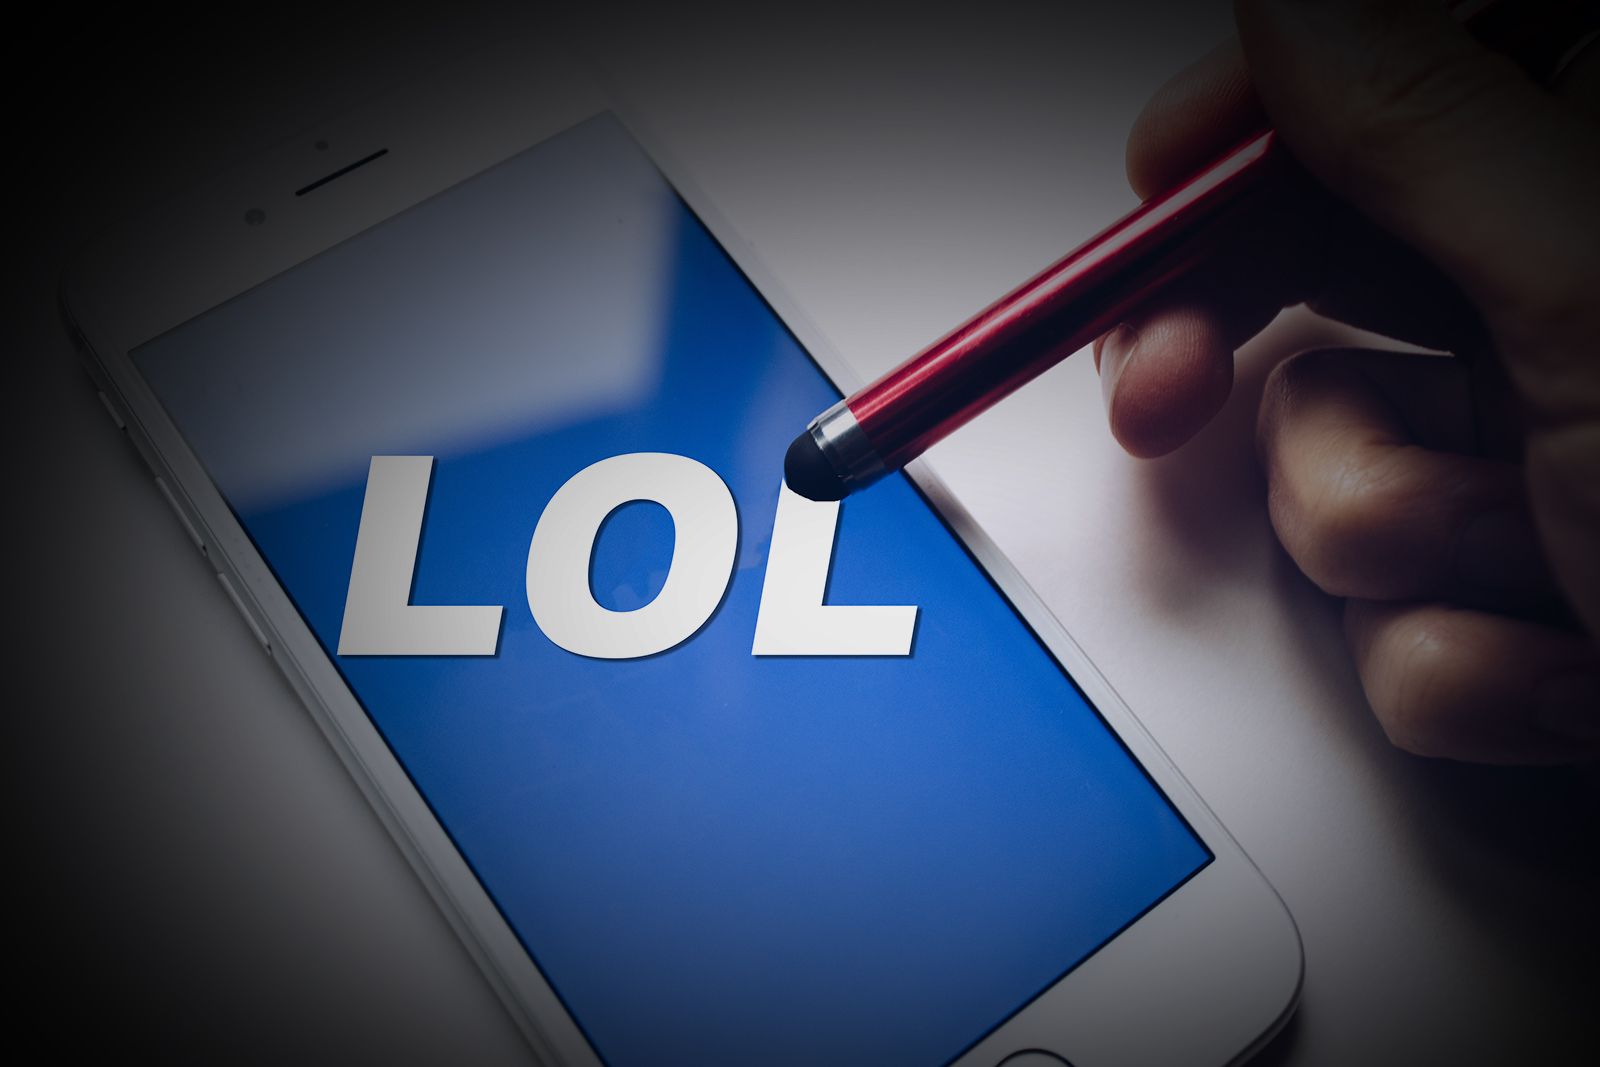 Facebook is testing a new LOL app with teens but will they even want it image 1